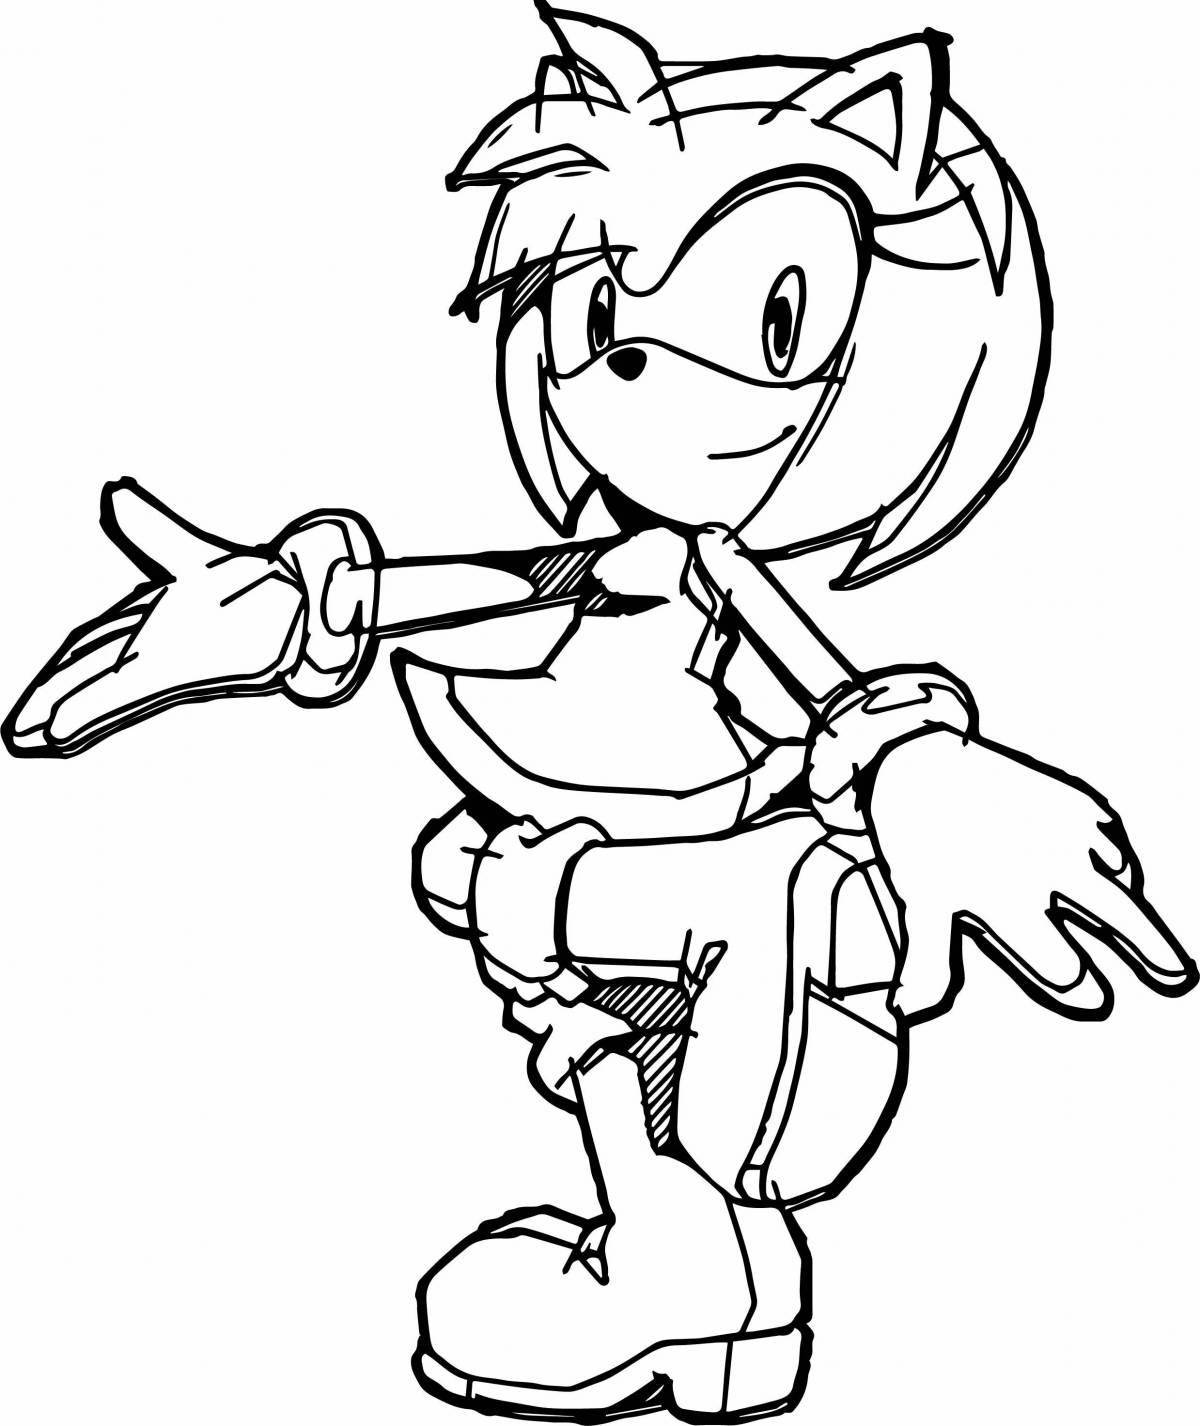 Coloring sonic and amy rose